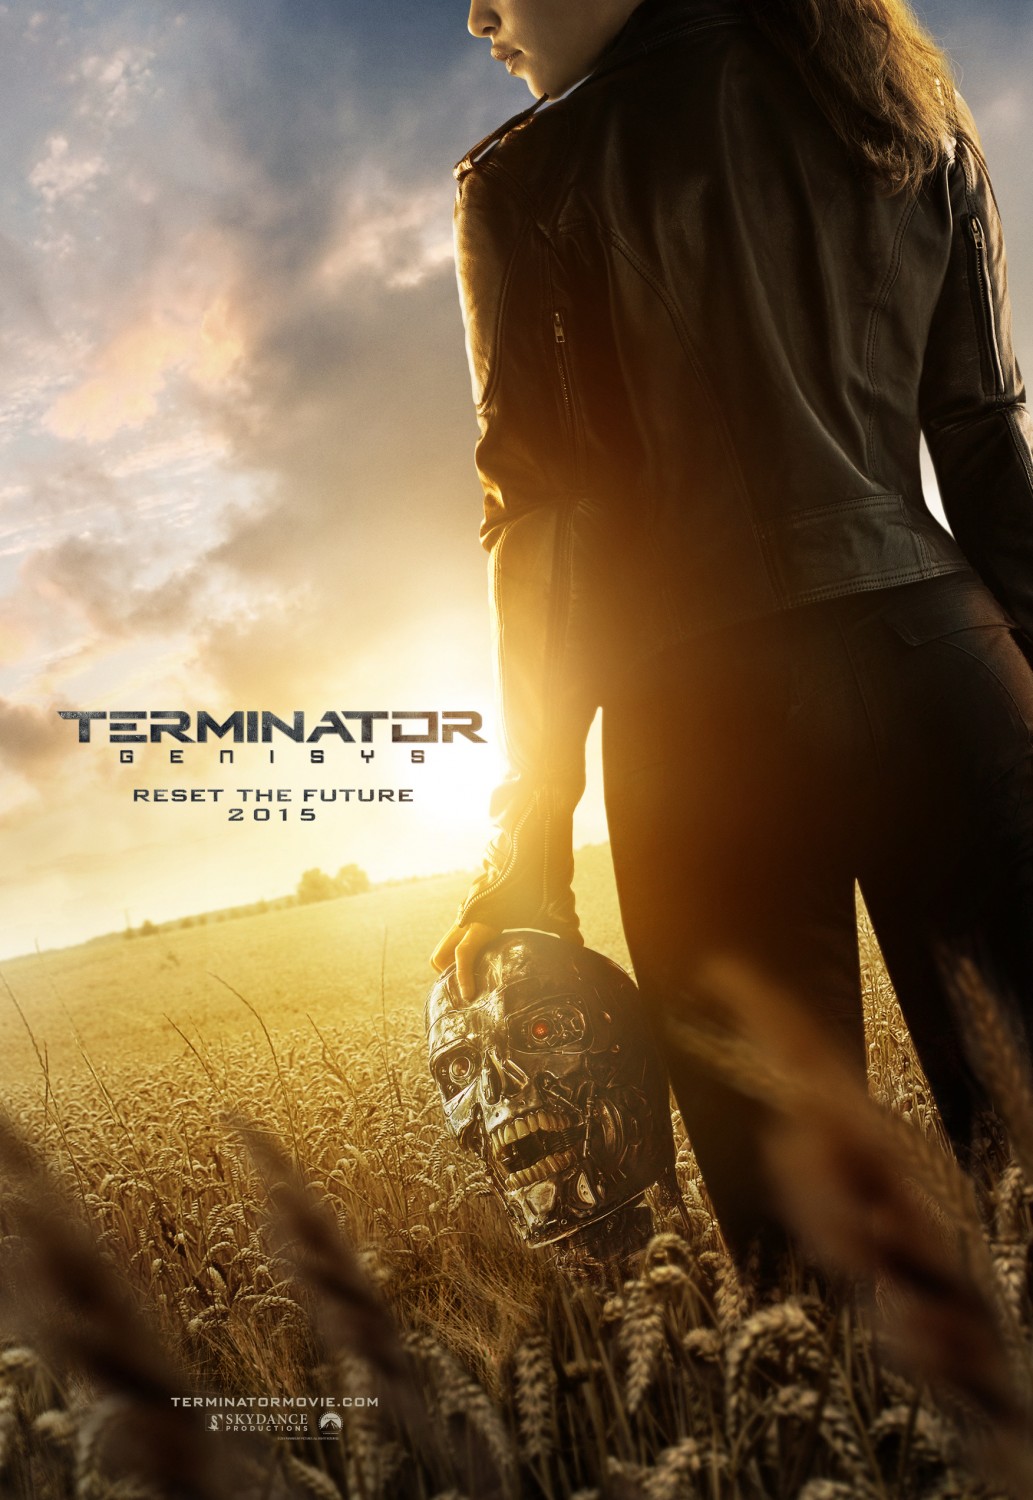 FIRST Trailer ‘Terminator Genysis’ & Poster The